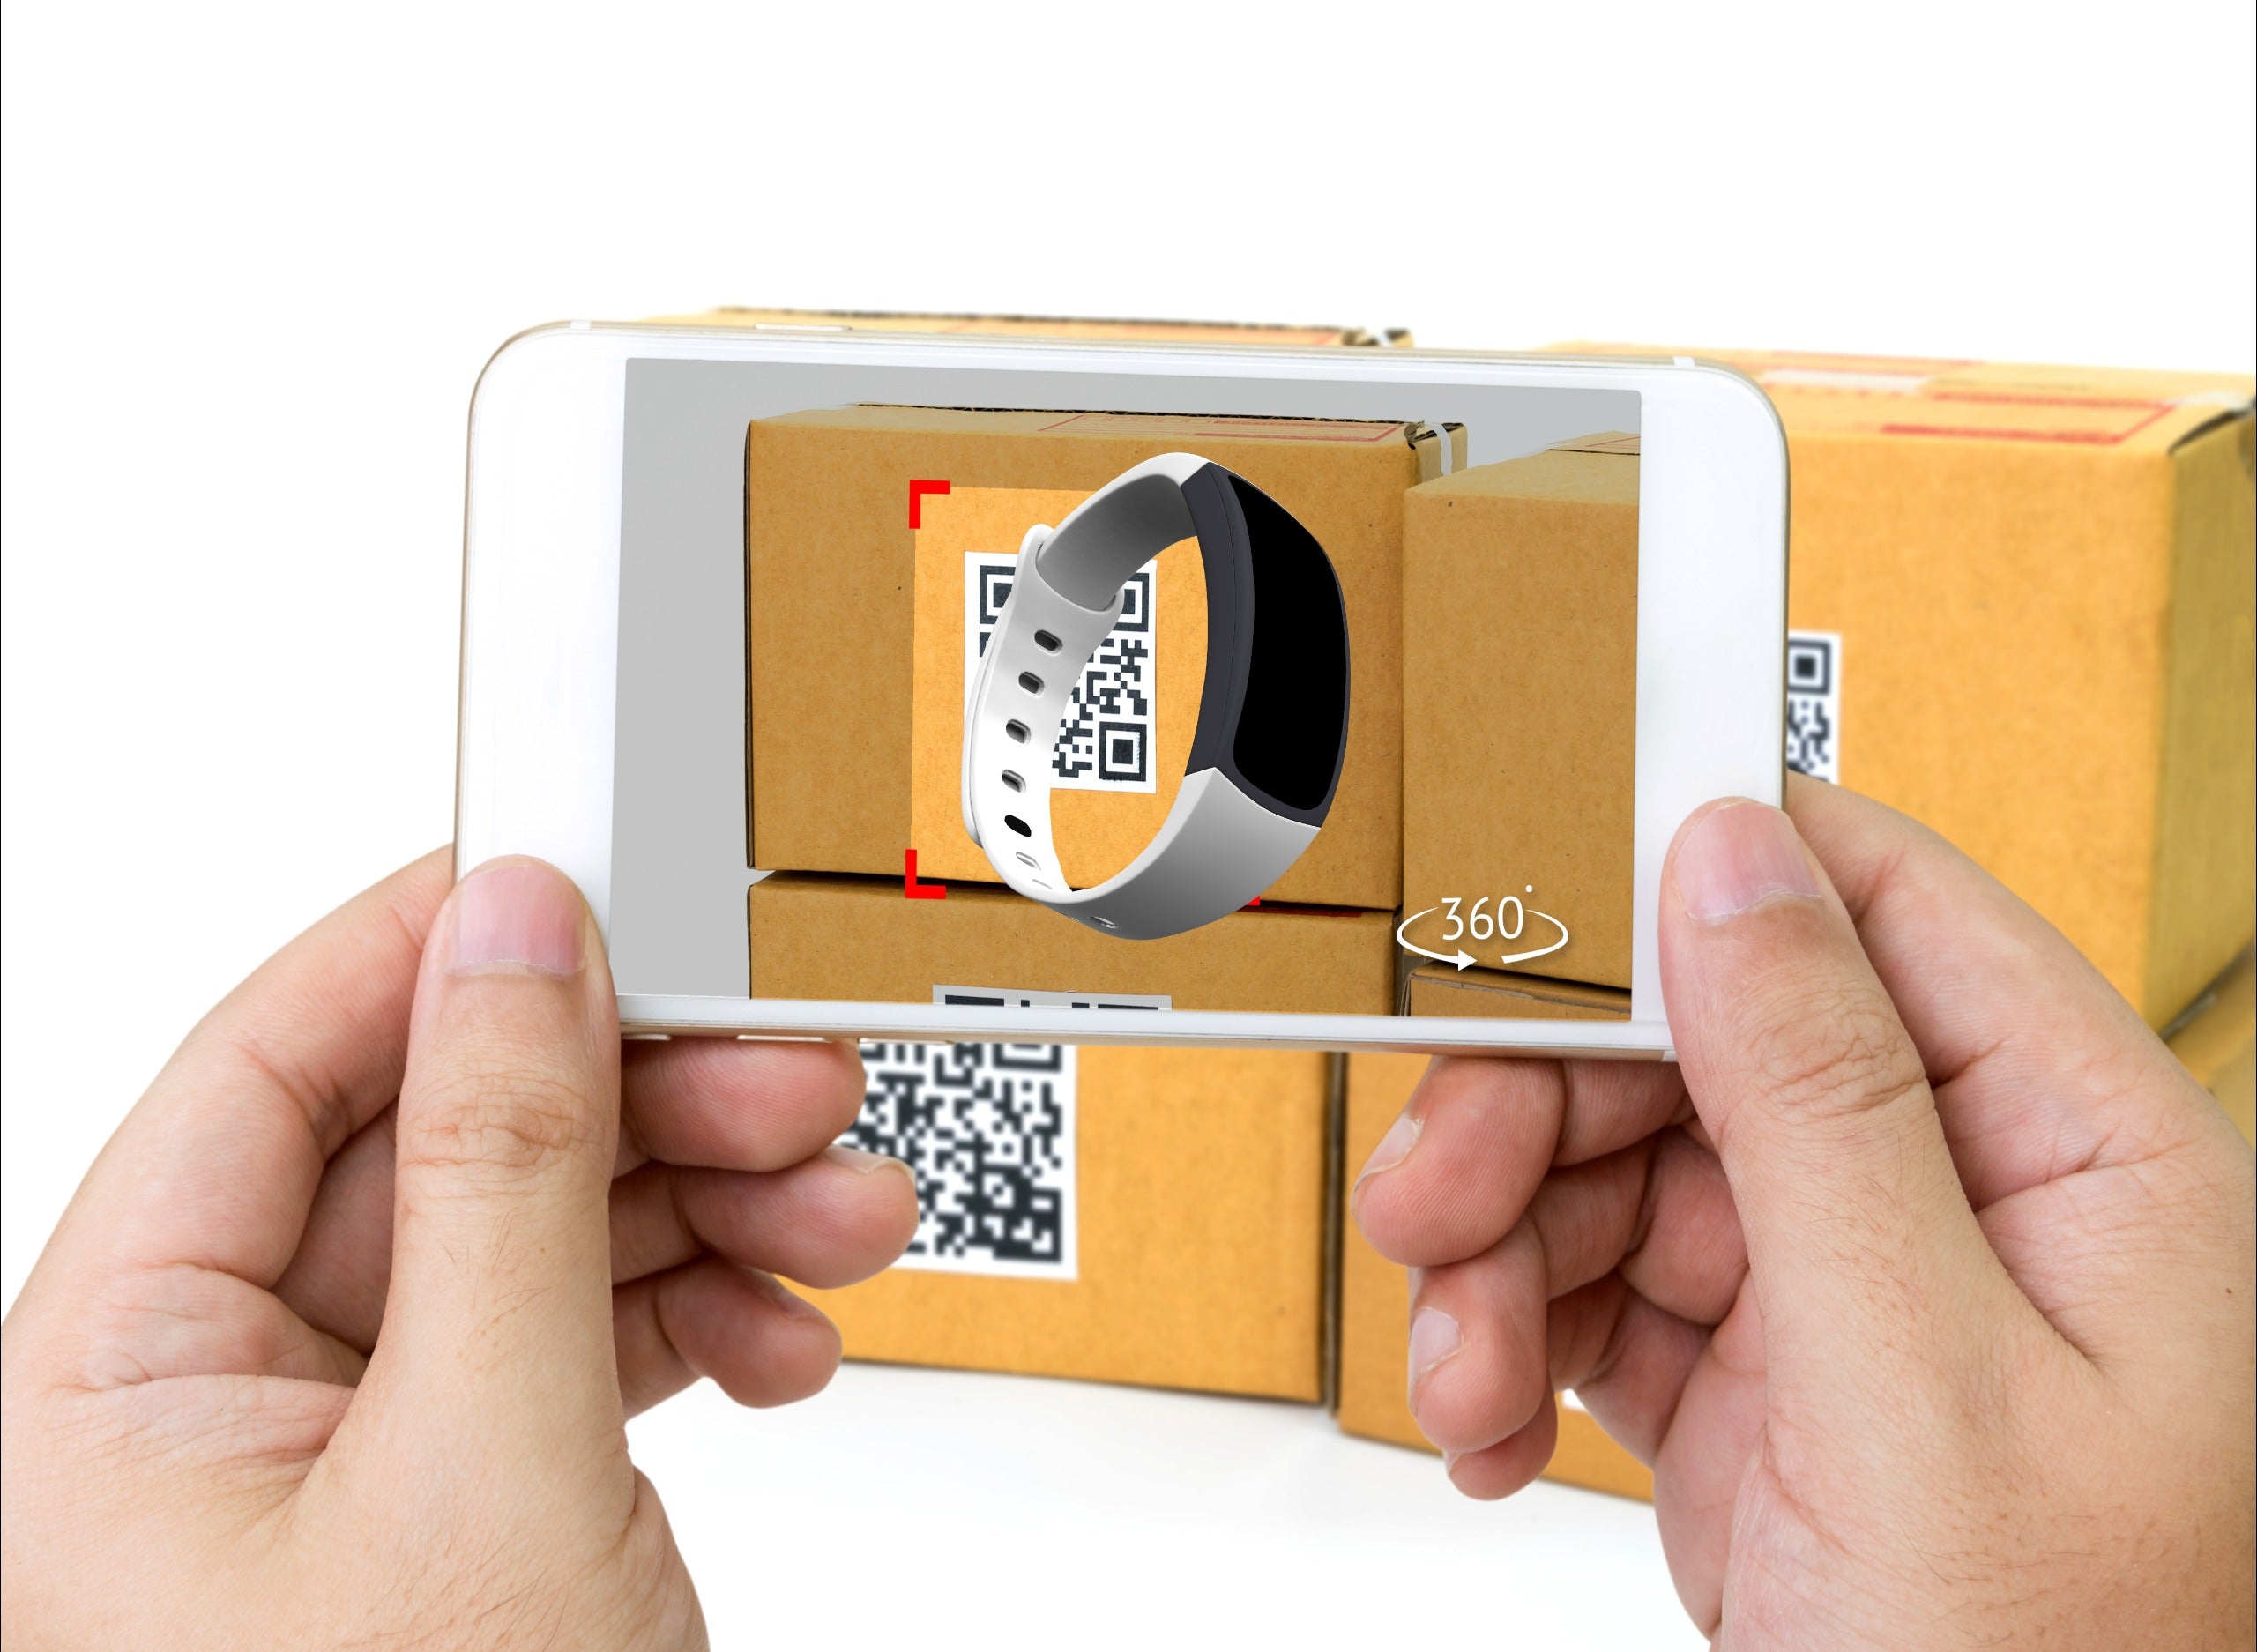 Interactive Packaging: Engaging Customers Beyond the Product